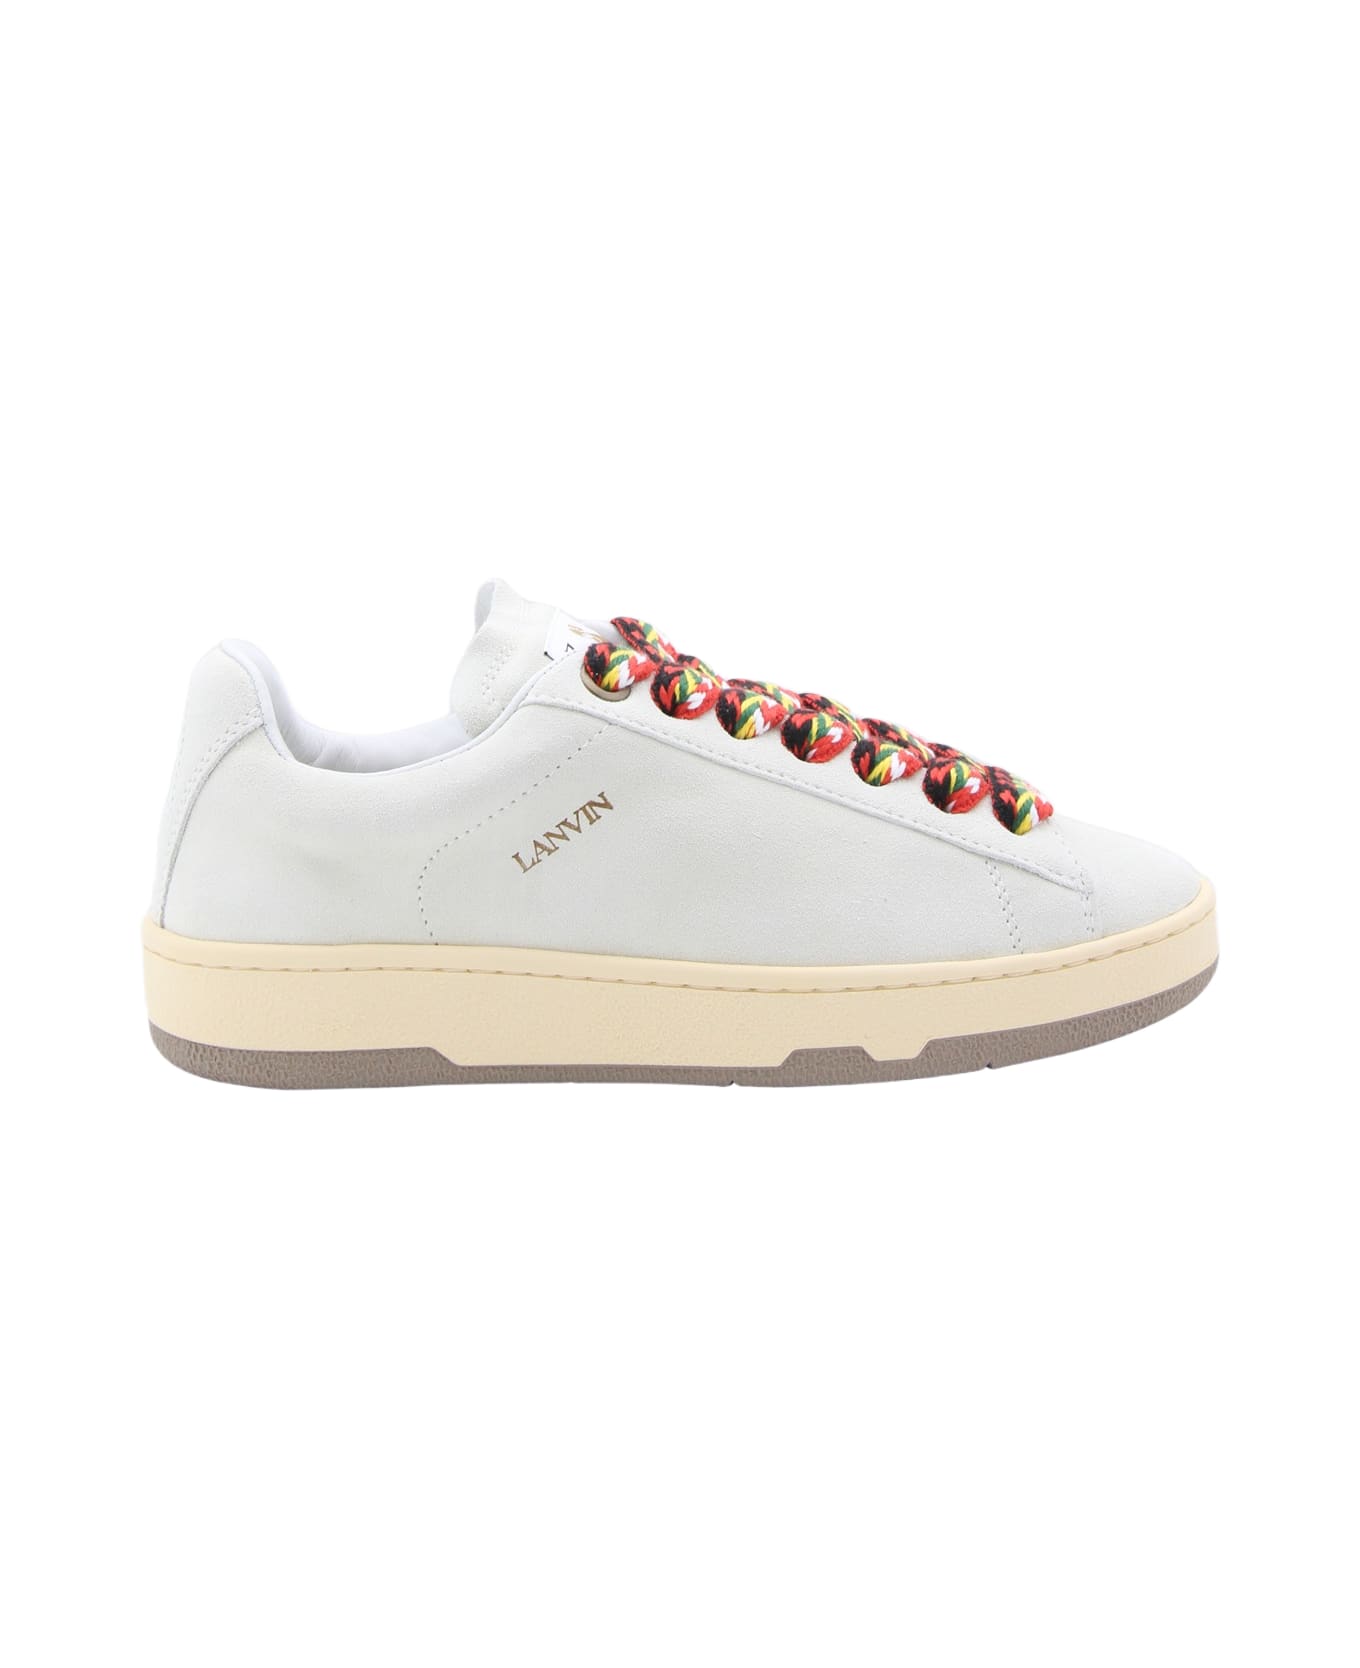 Lanvin White Leather Lite Curb Sneakers - White スニーカー